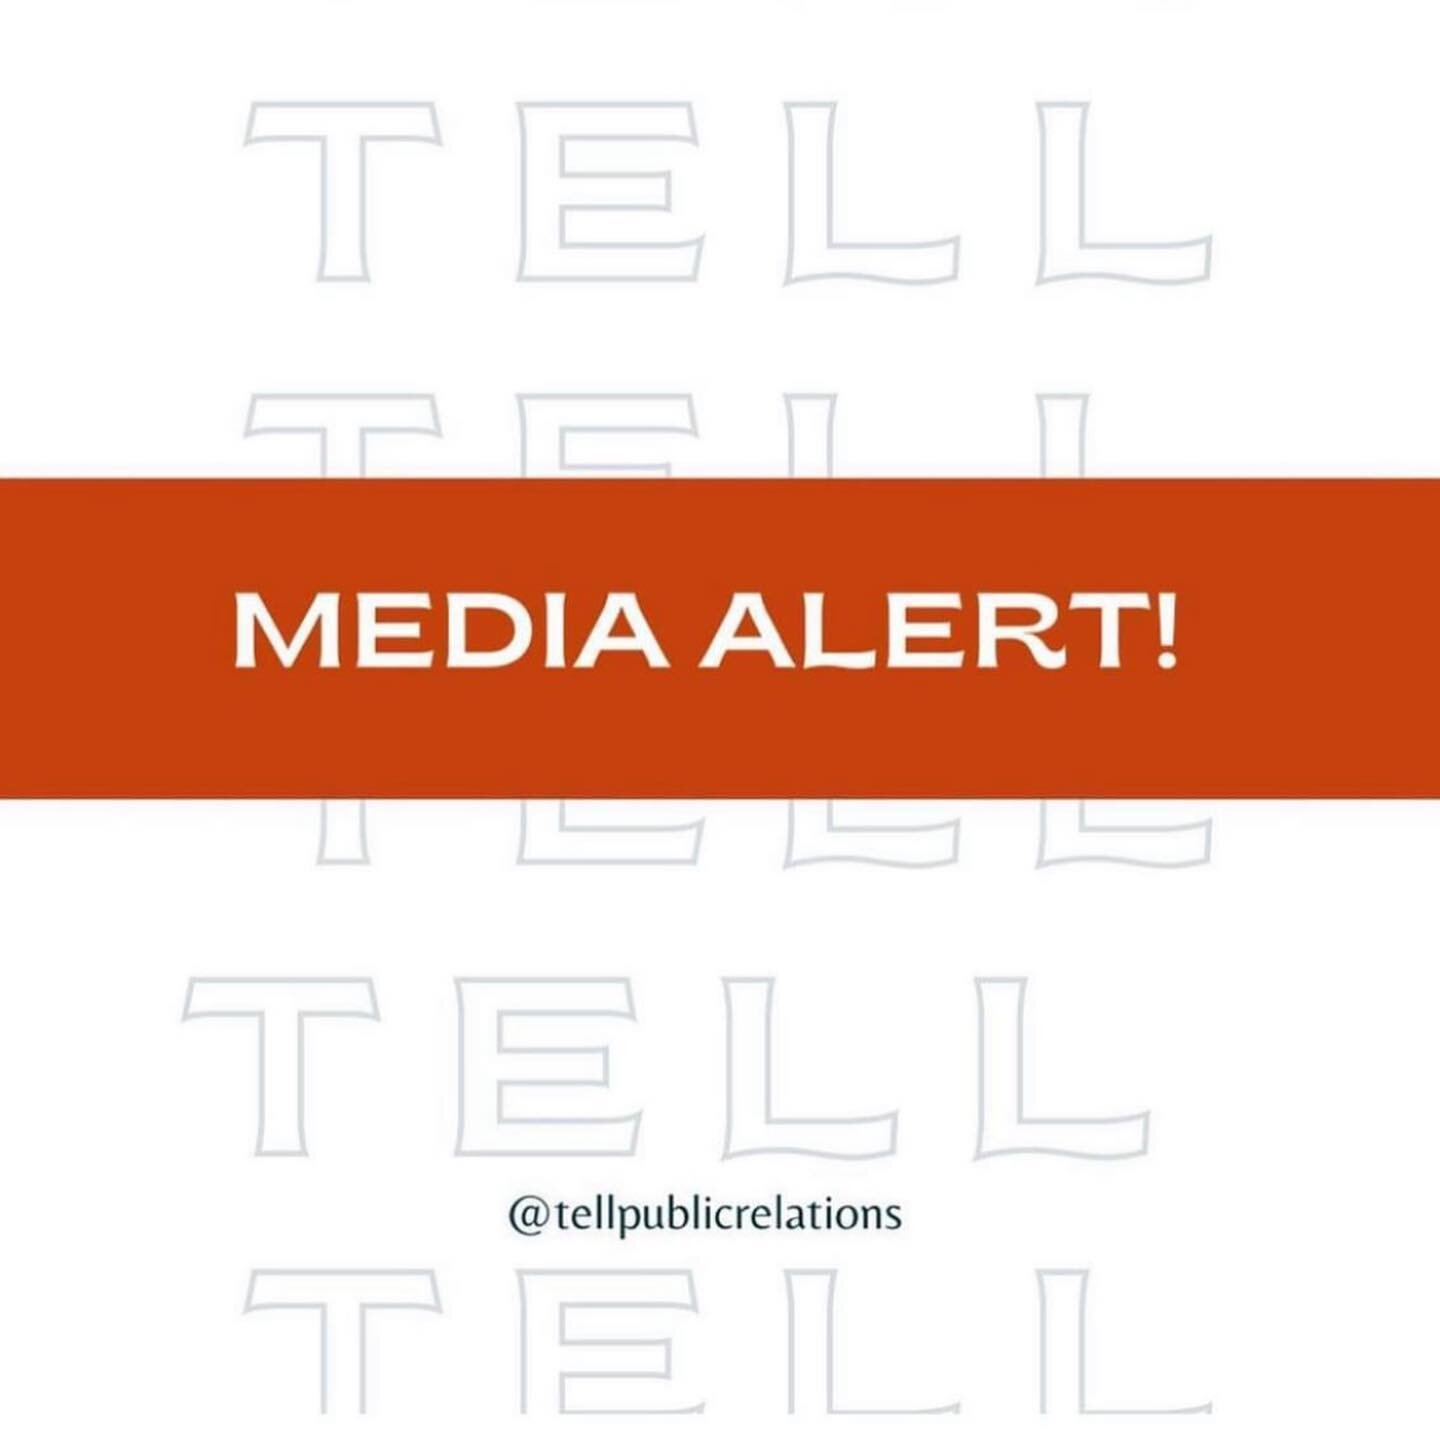 MEDIA ALERT🚨Here&rsquo;s the deal:

Our members get media alerts multiple times a week, as well as:

&bull;a monthly call w one of our publicists
&bull;a monthly &ldquo;tell-it-like-is&rdquo; training that is NOT available on social media or YouTube